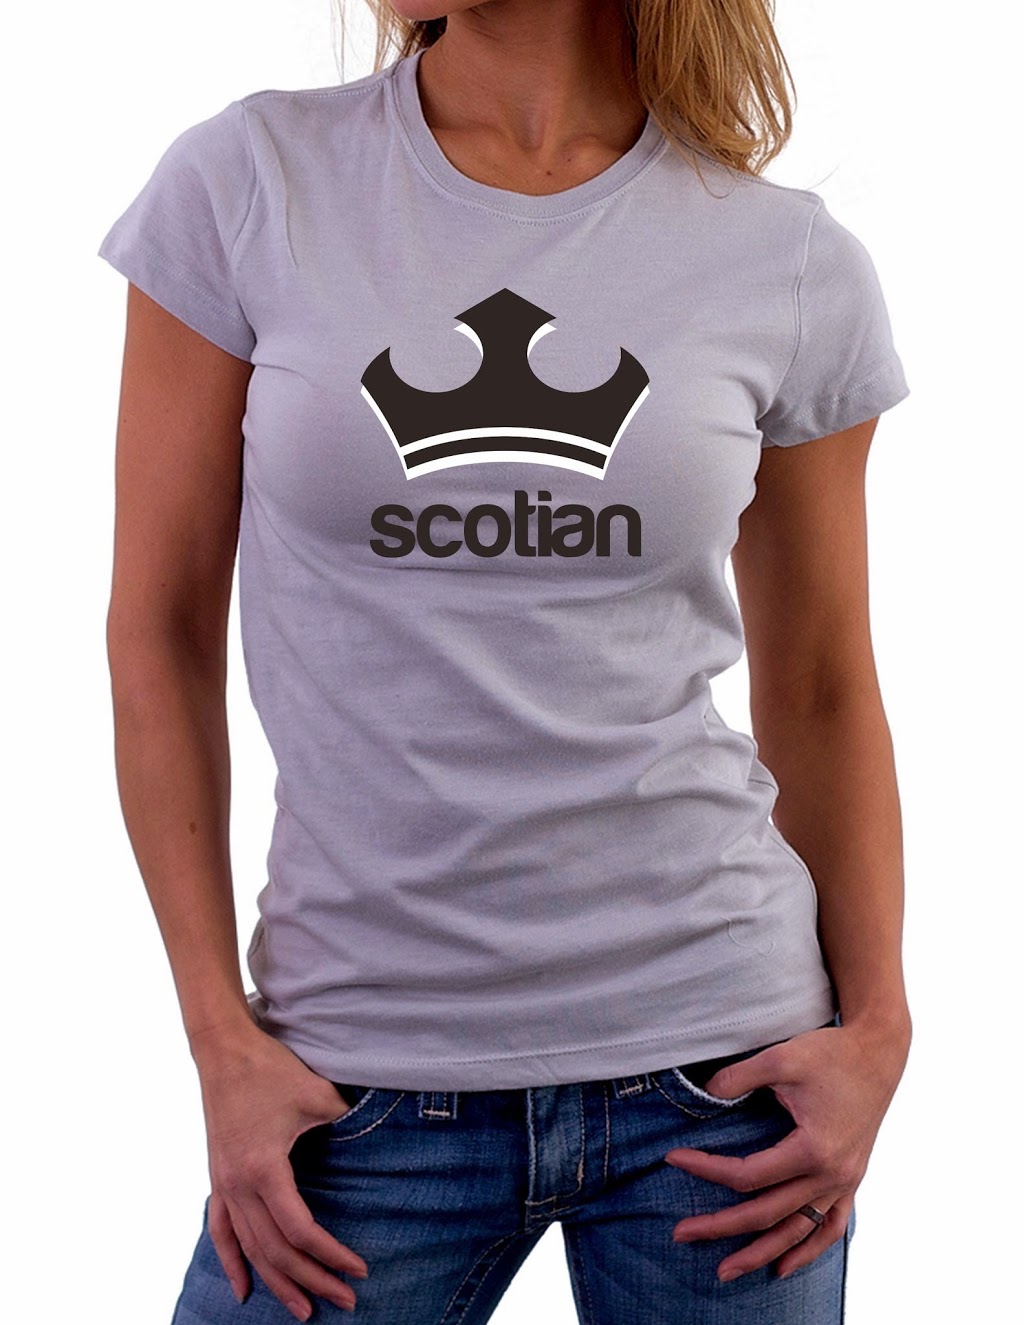 Kool Ts & More | clothing store | 6070 Stairs St, Halifax, NS B3K 2E5, Canada | 9024064944 OR +1 902-406-4944